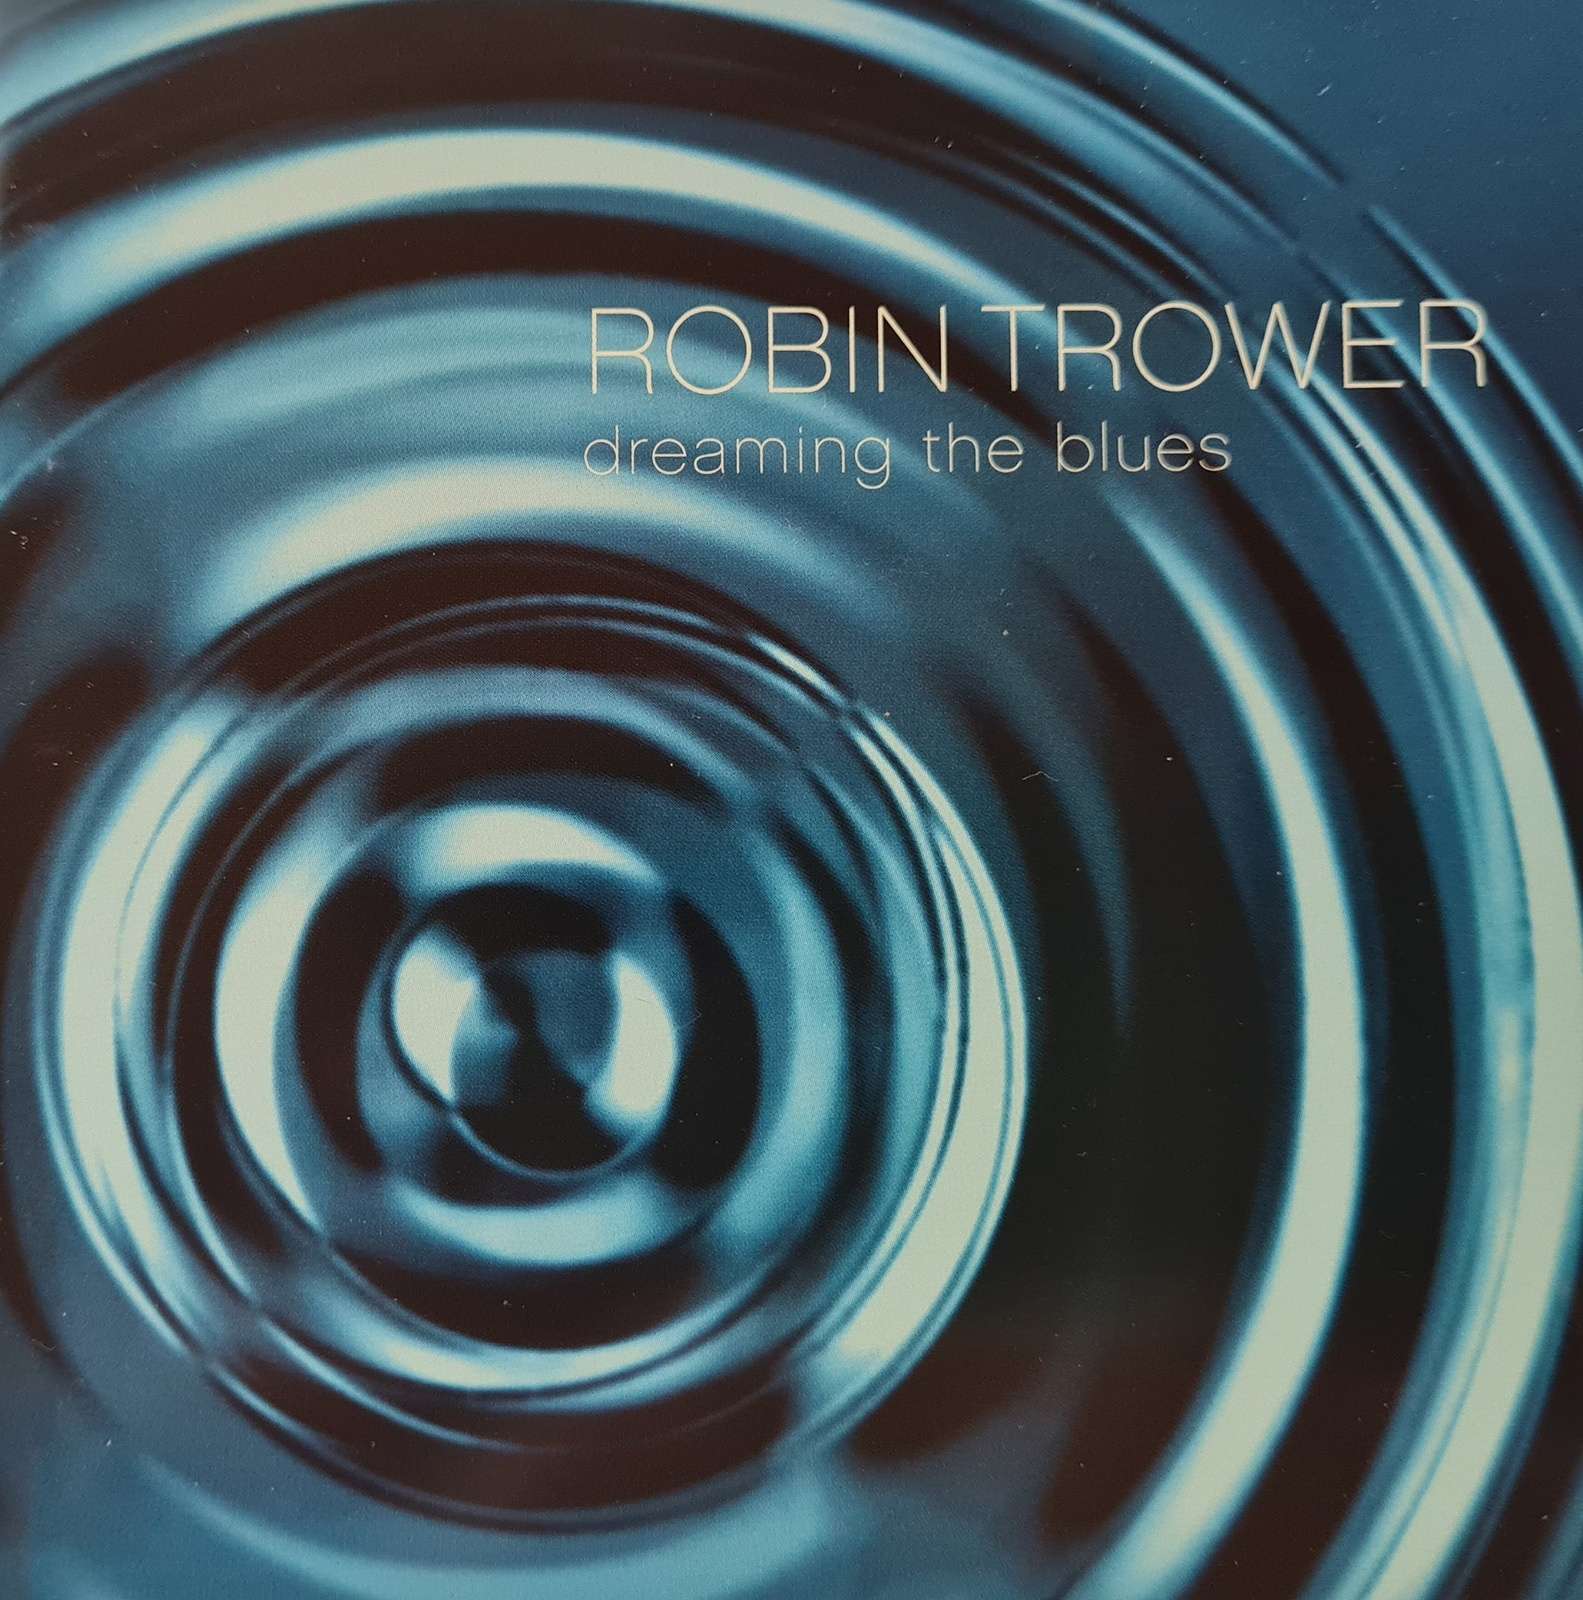 Robin Trower - Dreaming the Blues (CD)